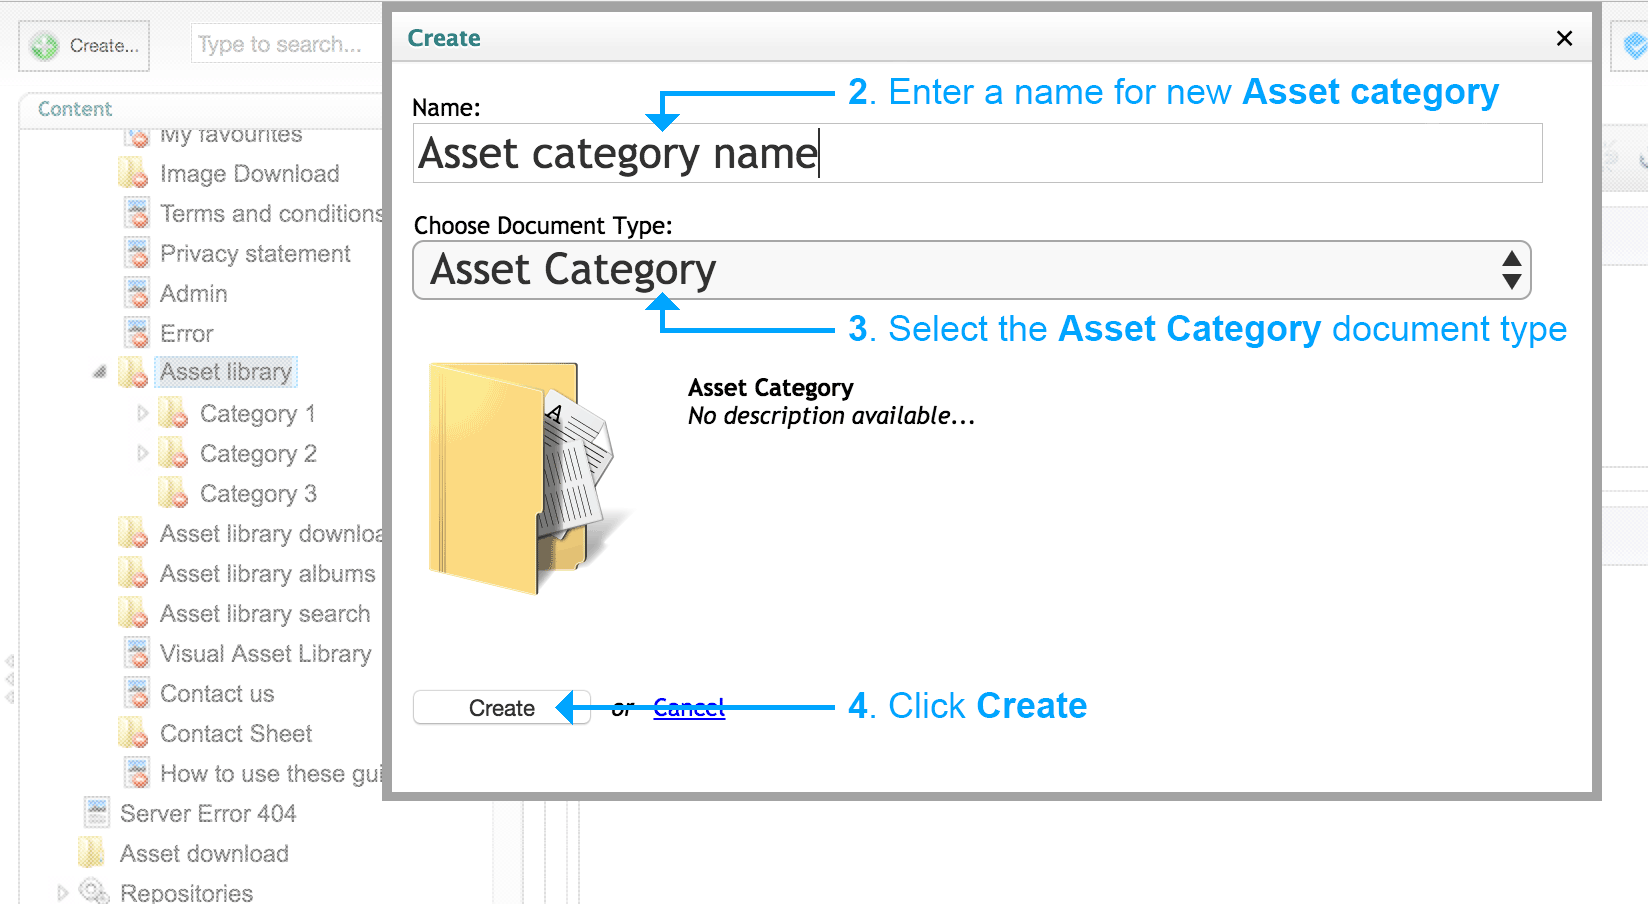 Step 2-4 – Enter a name and choose Asset Category doc type